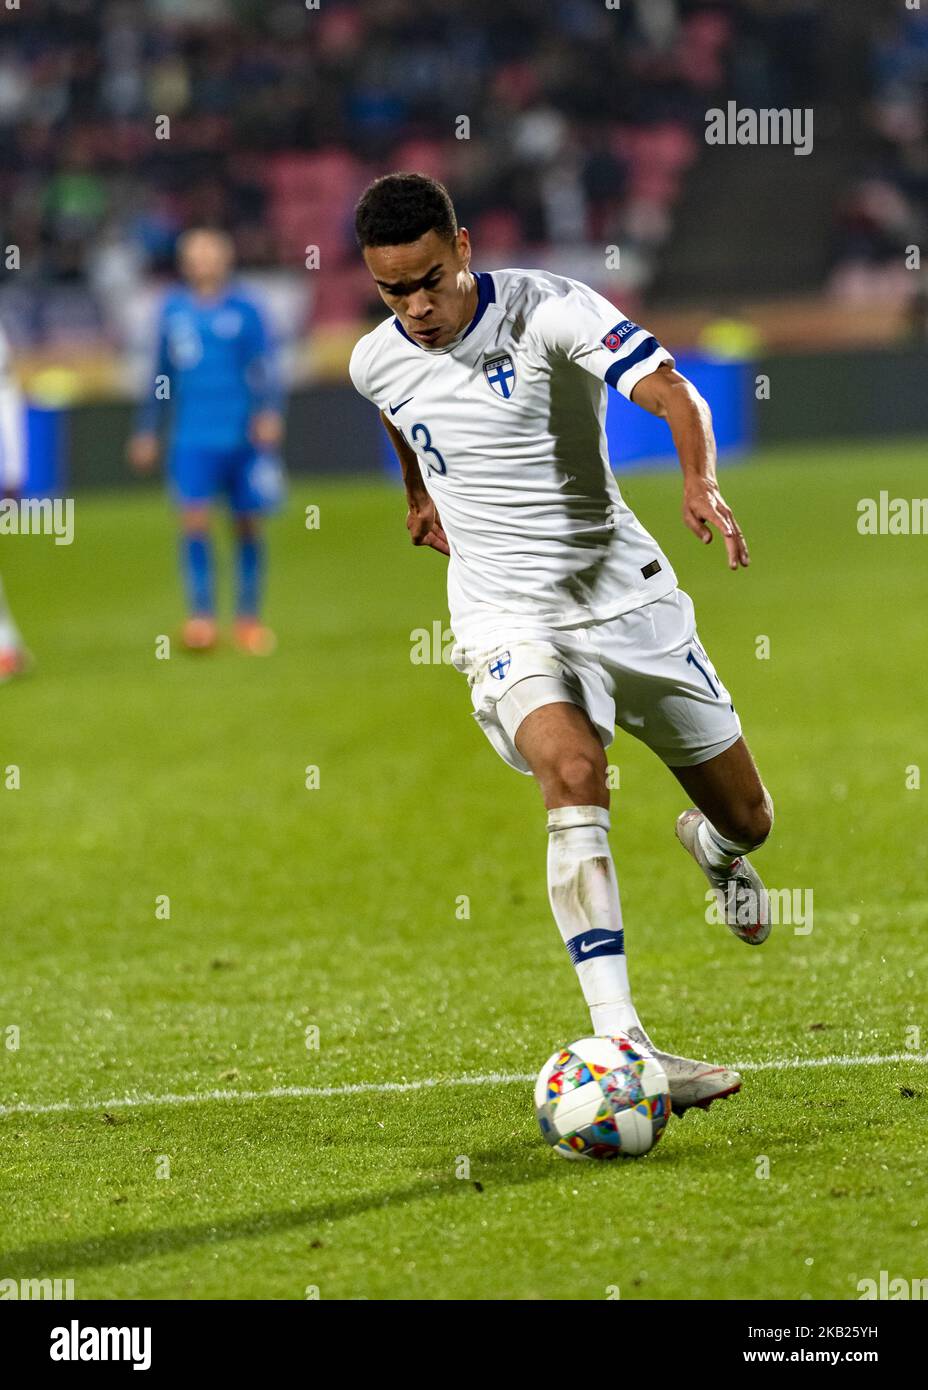 Pyry Soiri of Finland controls the ball during the UEFA Nations League group stage football match Finland v Grece in Tampere, Finland on October 15, 2018. (Photo by Antti Yrjonen/NurPhoto) Stock Photo